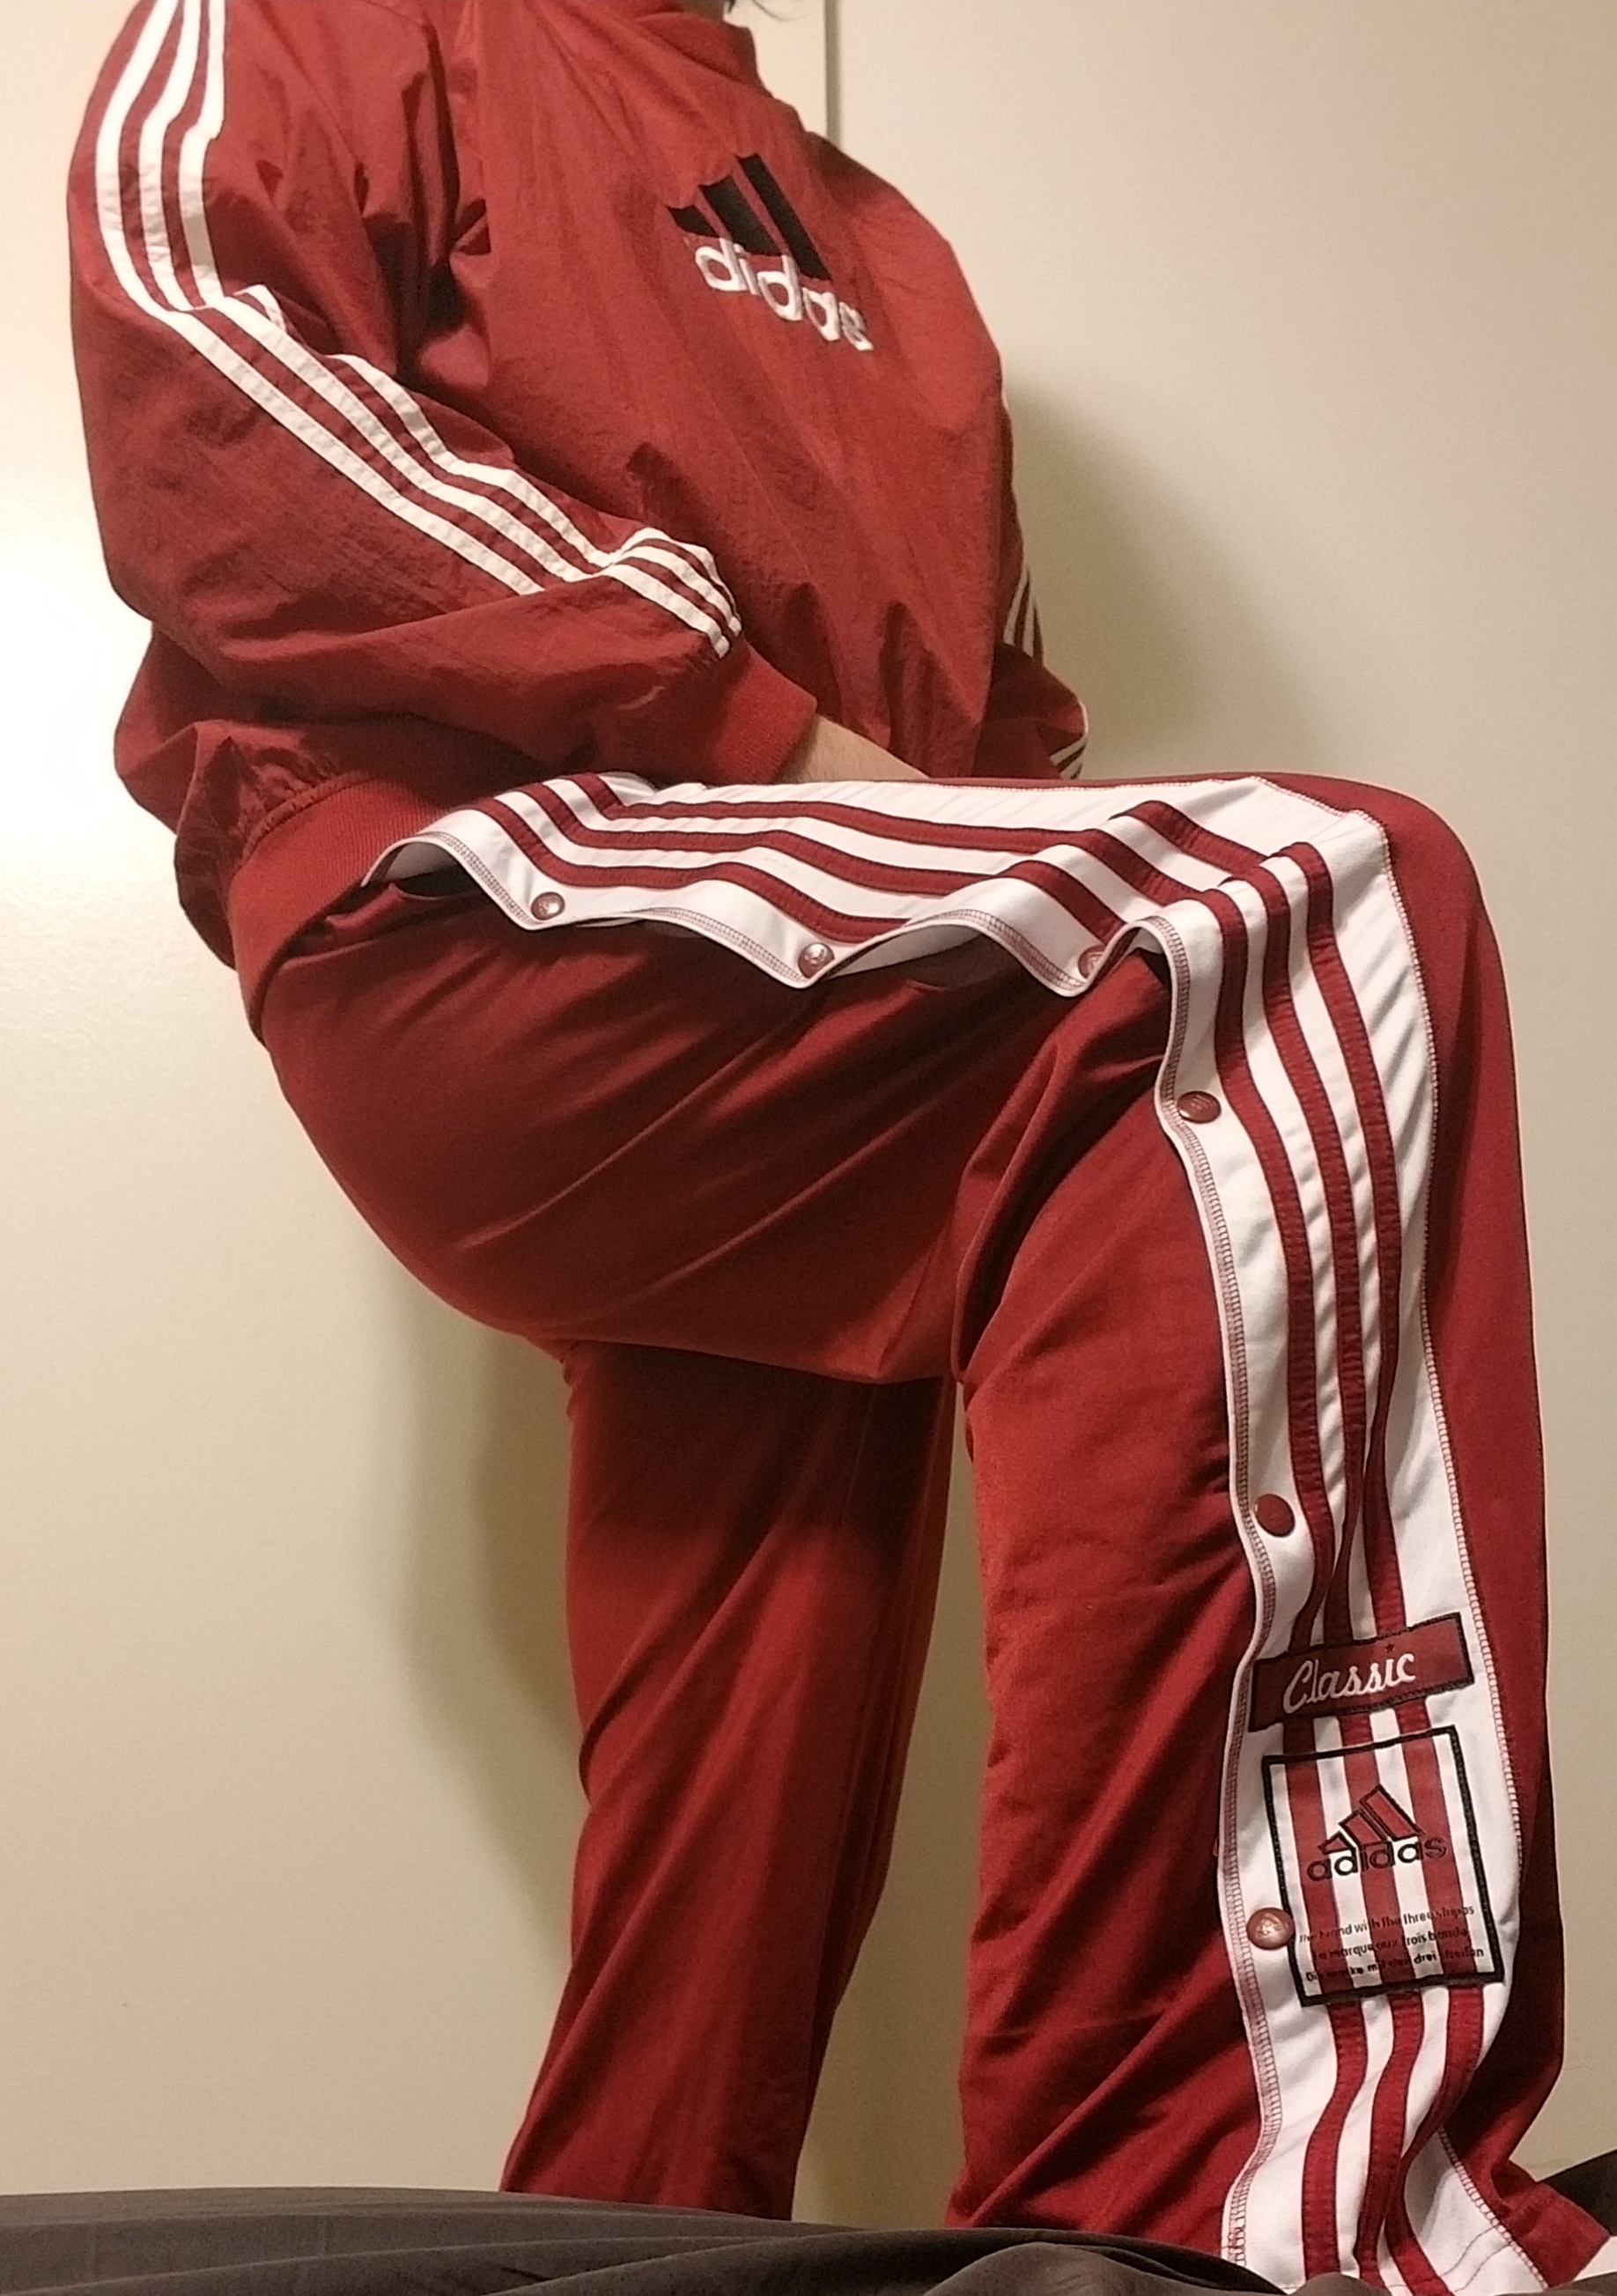 Adidas popper pants with swishy red pullover